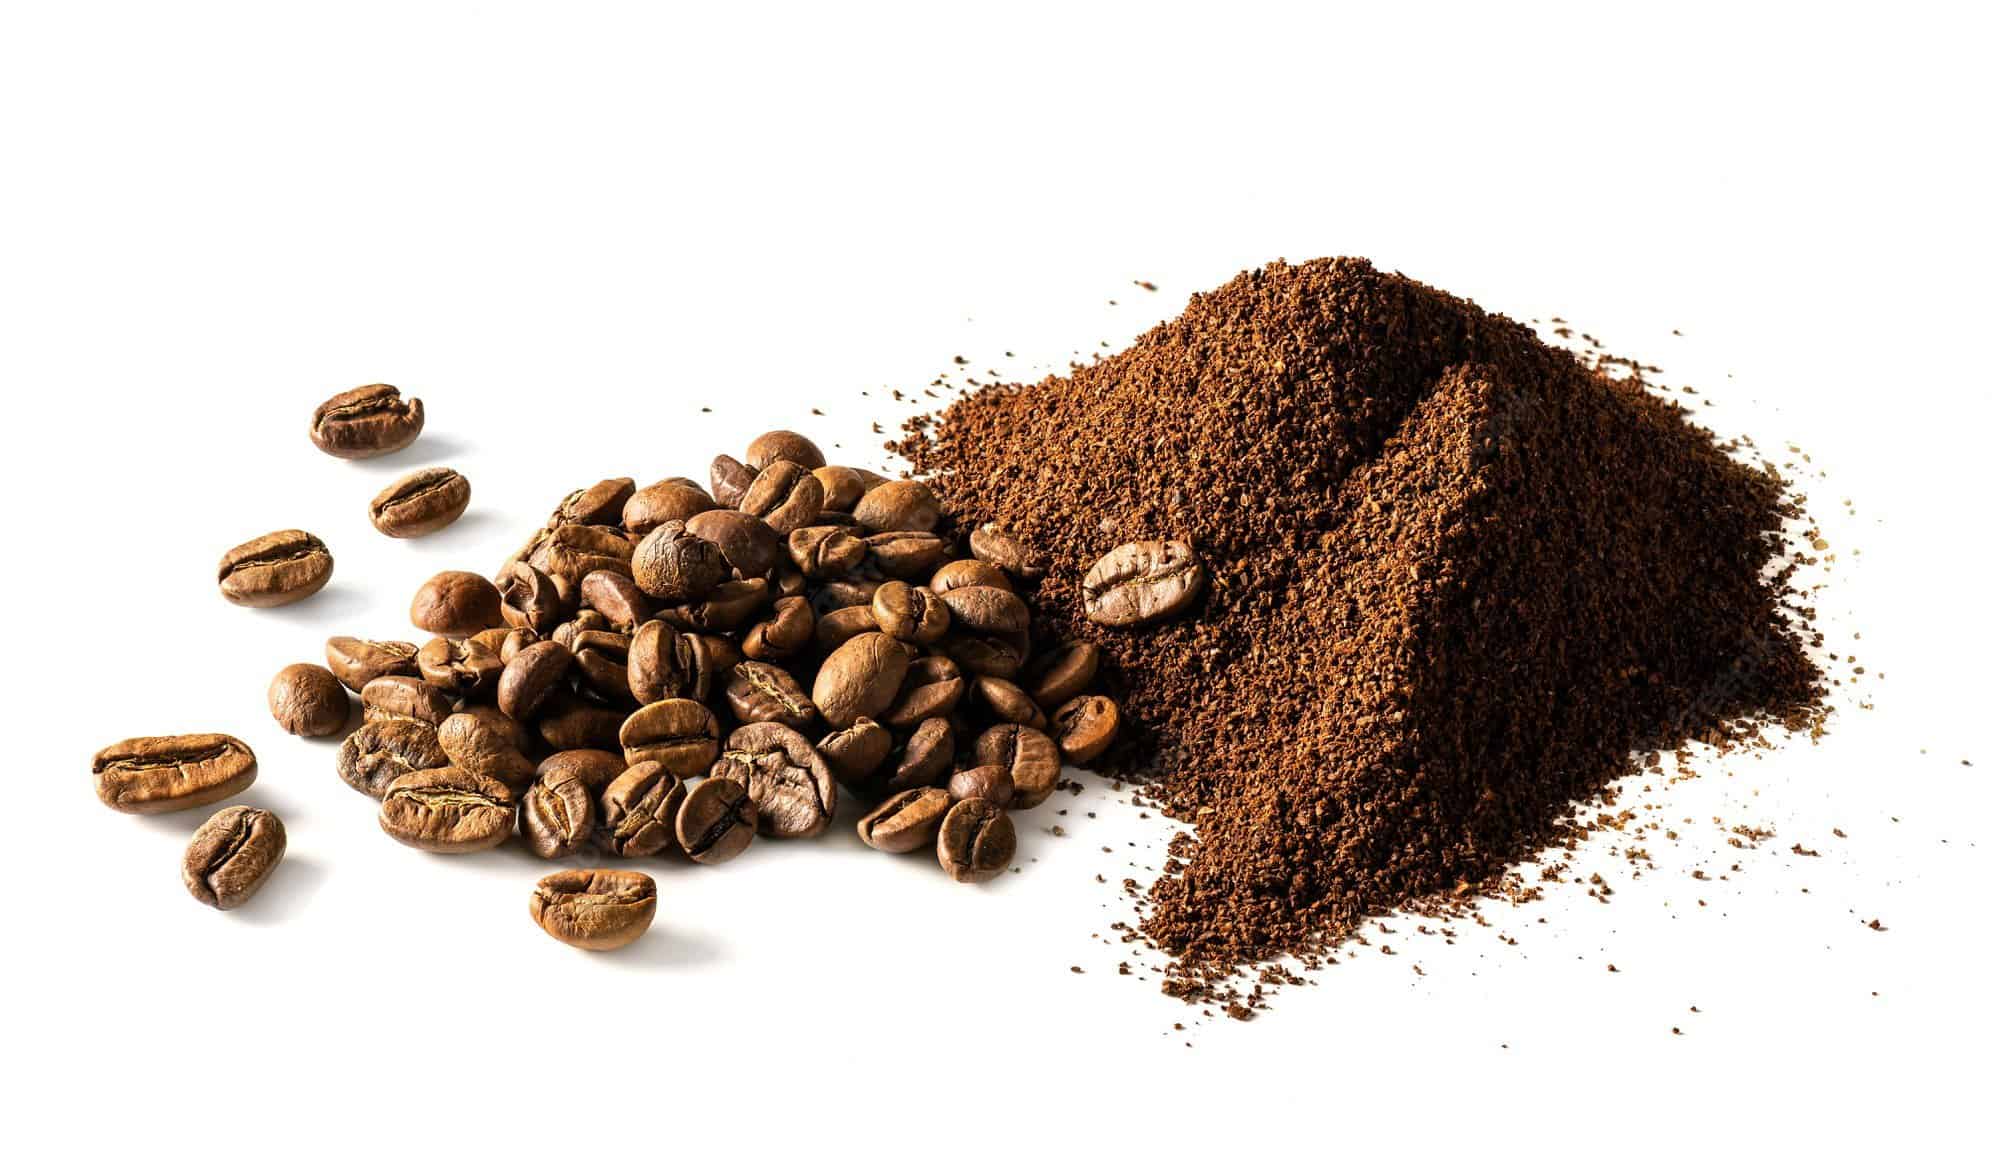 coffee beans and a pile of grounds sit on a white surface lit with a soft light